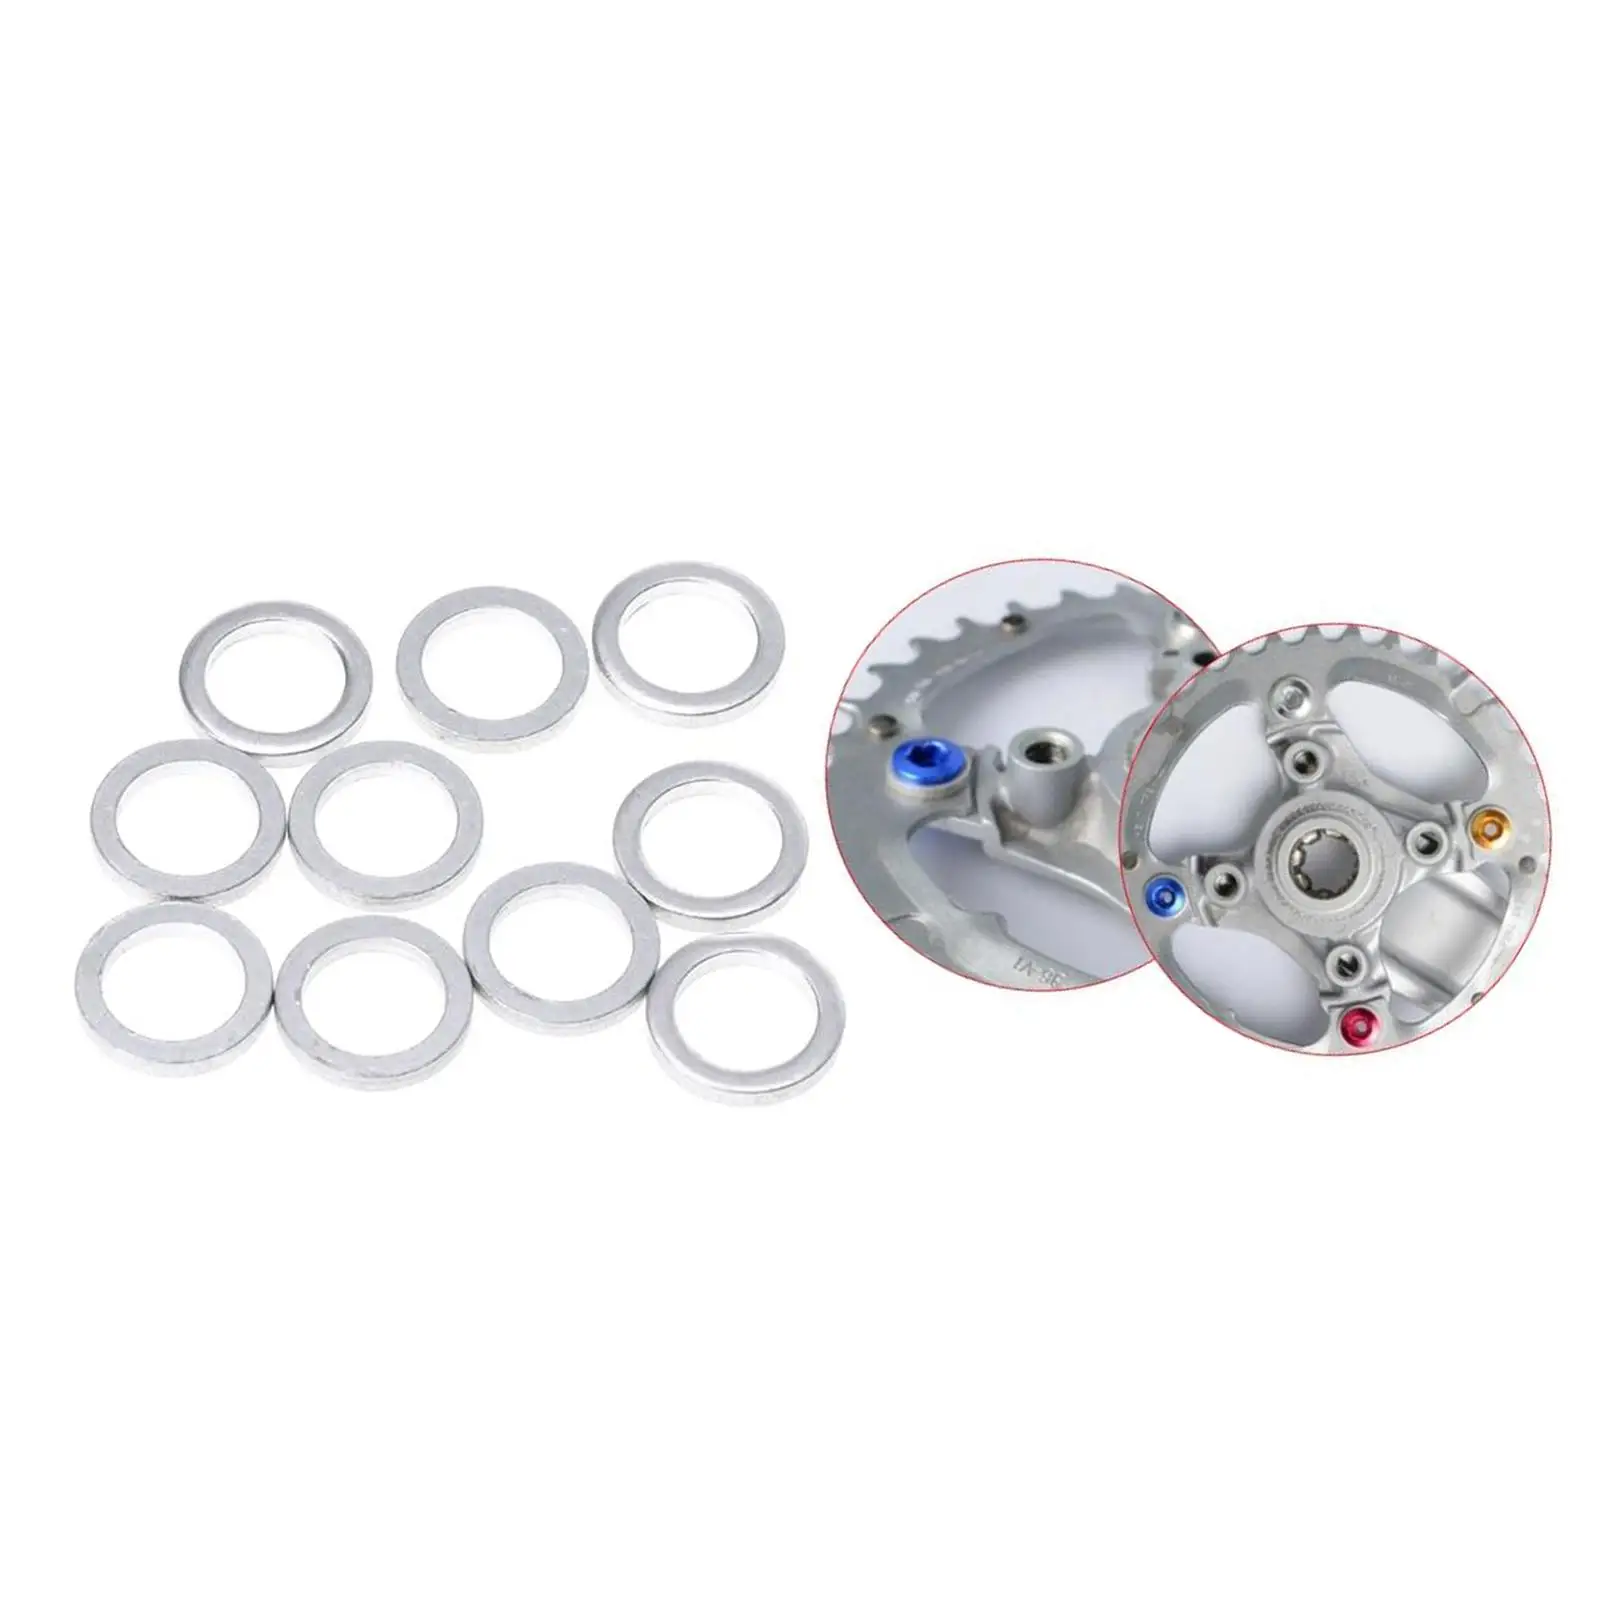 10Pack Bike  Aluminum Replacement Chainring Screw Spacer Washer Gasket Fixing Part 1mm Thick